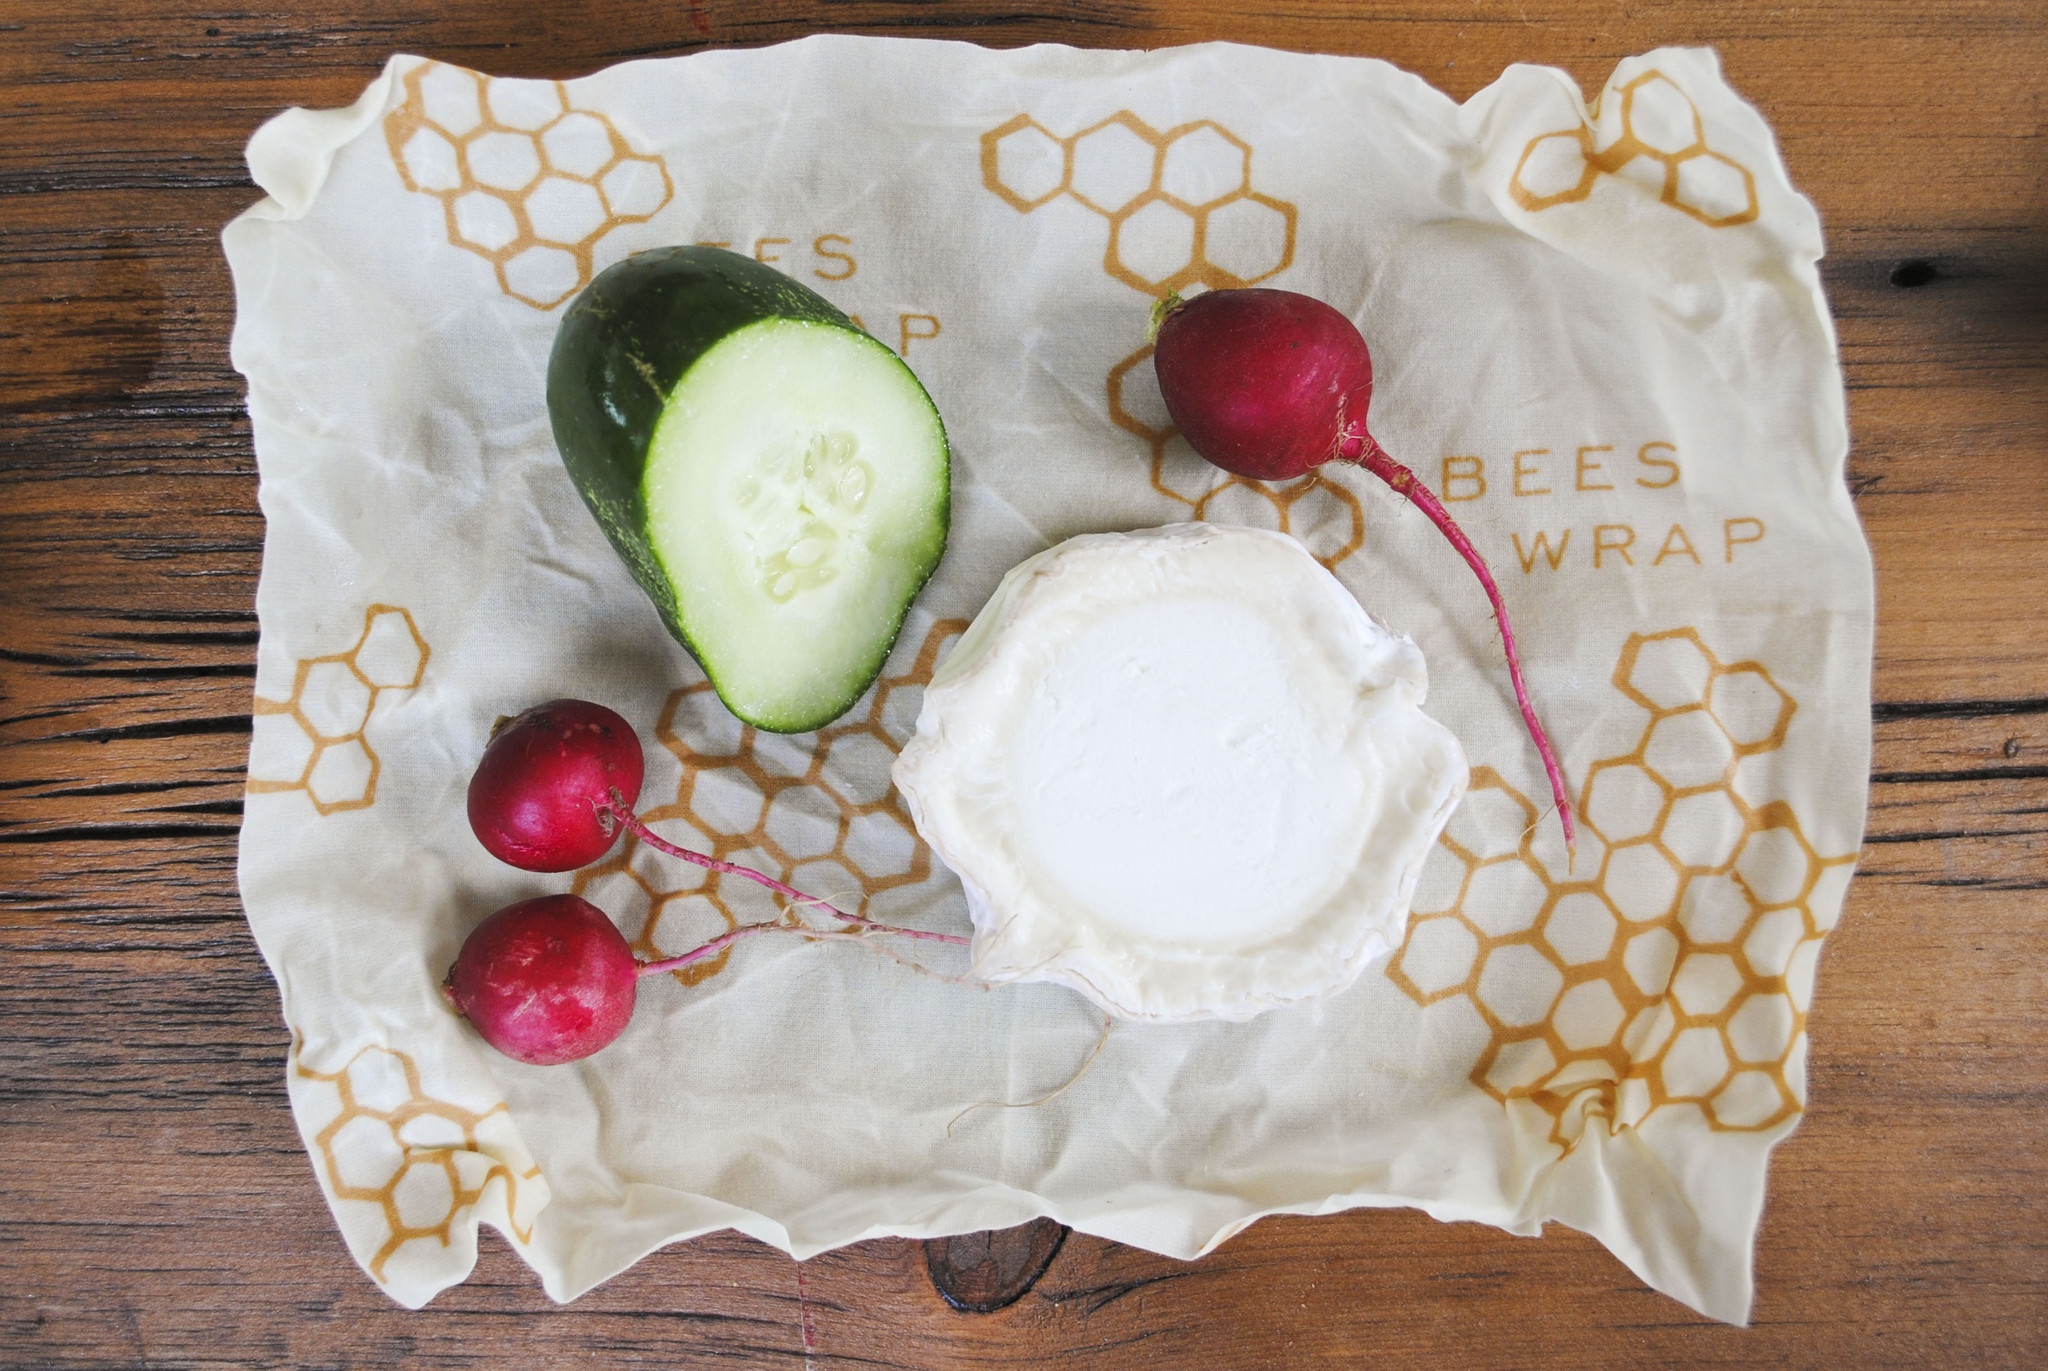 We replaced saran plastic wrap with beeswax food wraps -- here's